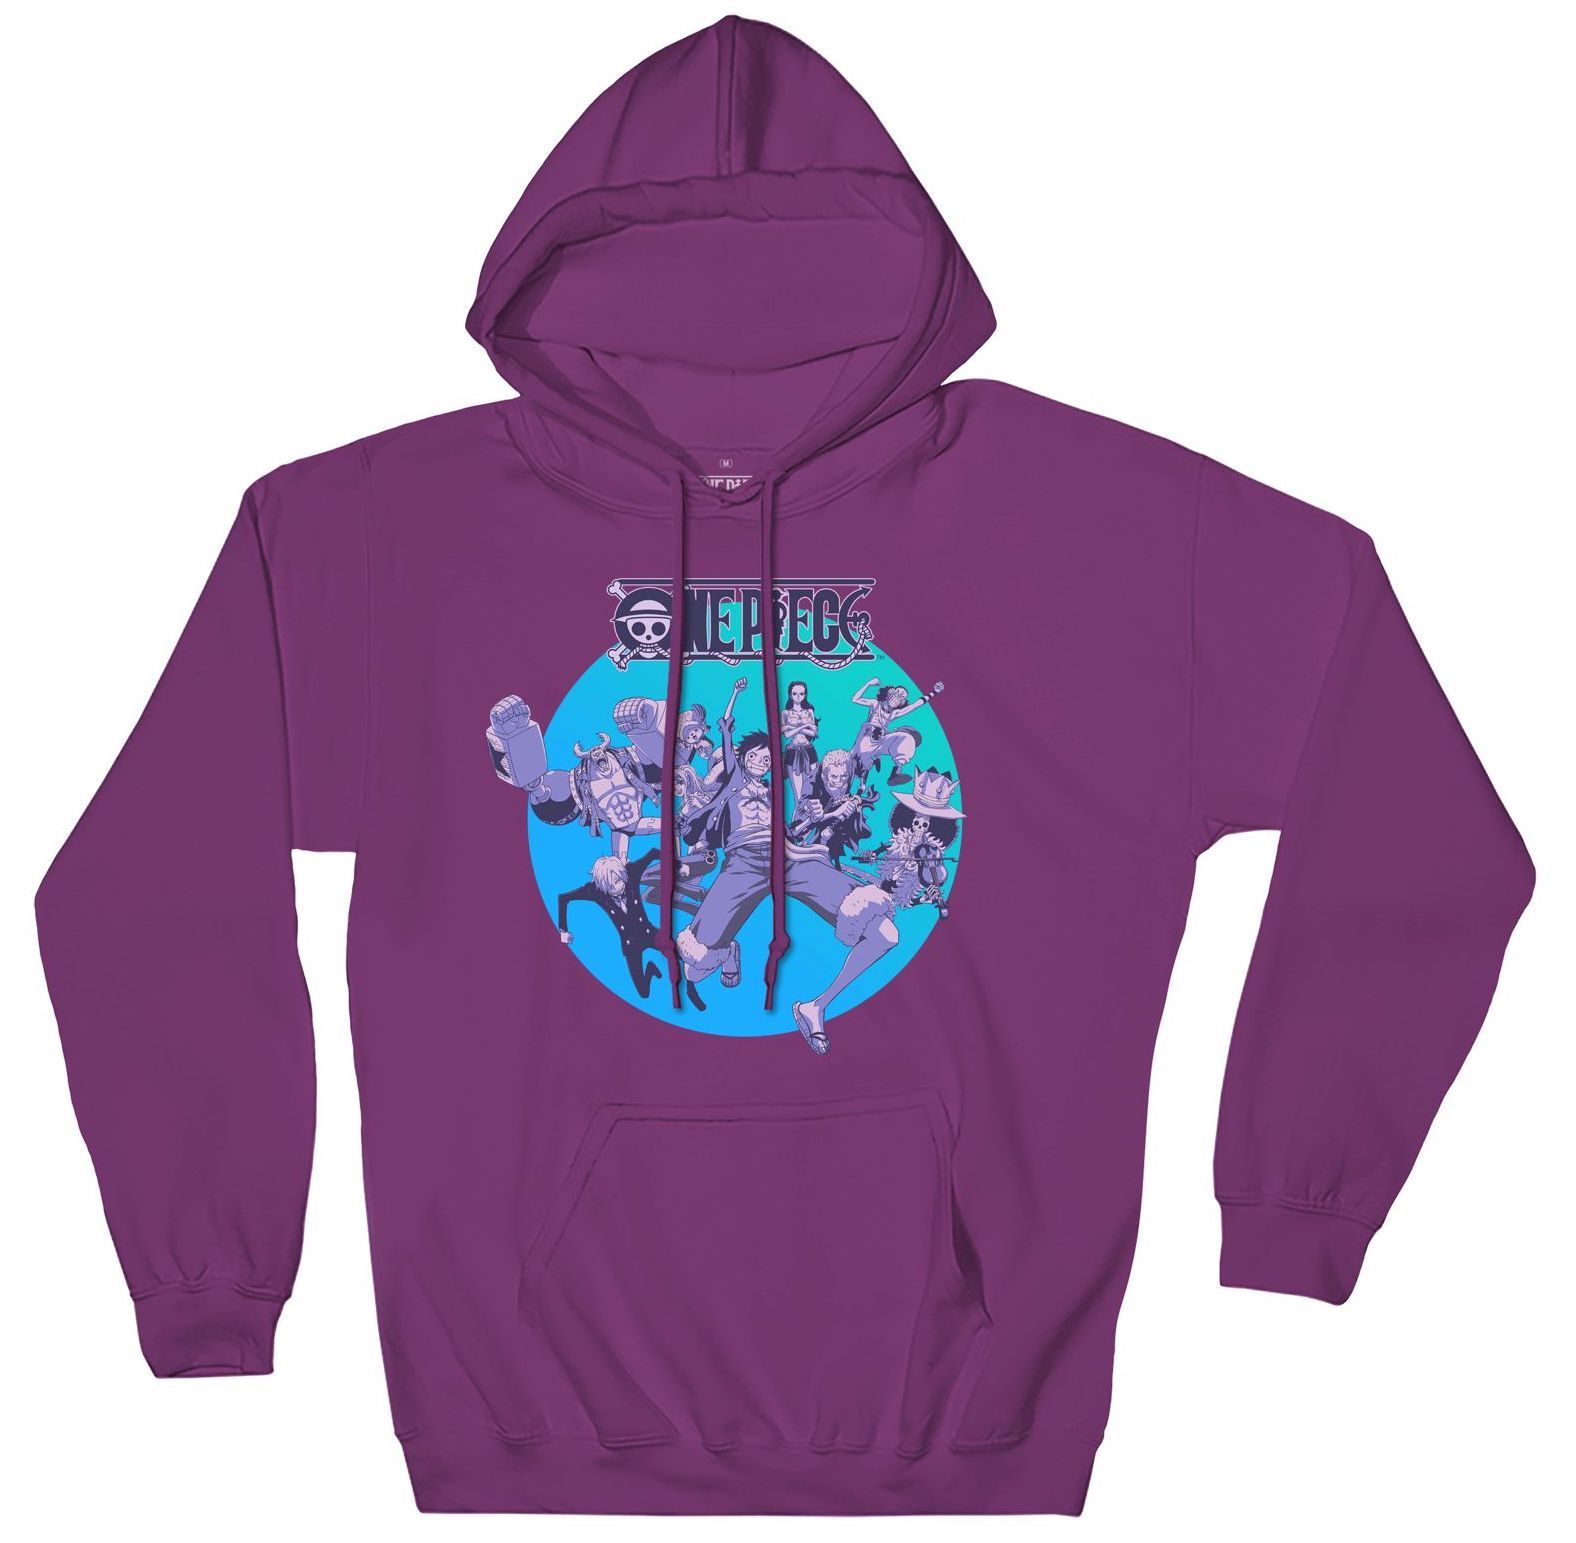 One Piece - Round Group Hoodie - Crunchyroll Exclusive! image count 1